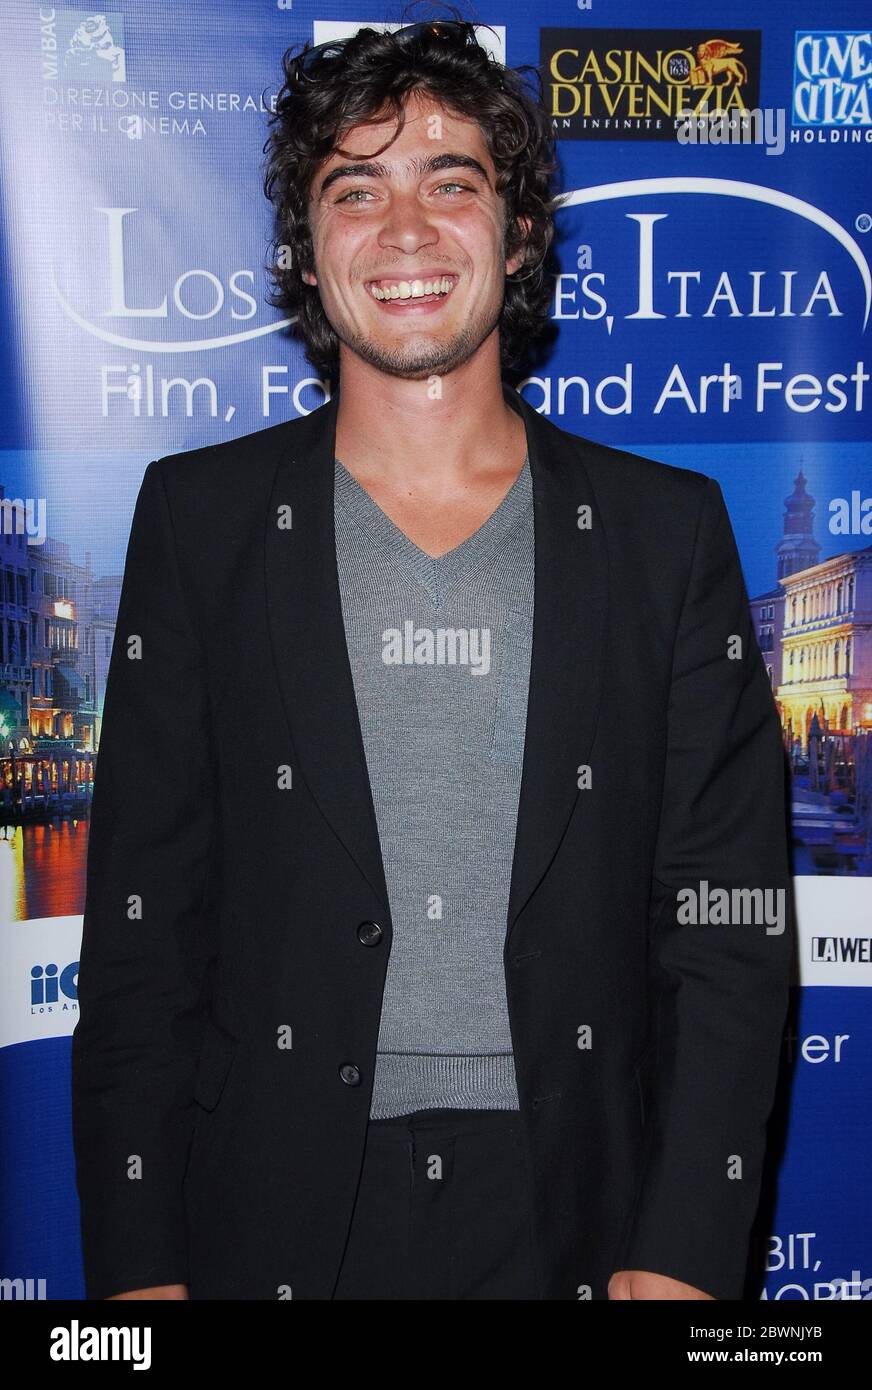 Riccardo Scamarcio at the 'Los Angeles, Italia' FIlm Festival Presents the Los Angeles Premiere of 'All The Invisible Children held at the Mann Chinese 6 Theatres in Hollywood, CA. The event took place on Monday, February 19, 2007. Photo by: SBM / PictureLux- File Reference # 34006-3199SBMPLX Stock Photo